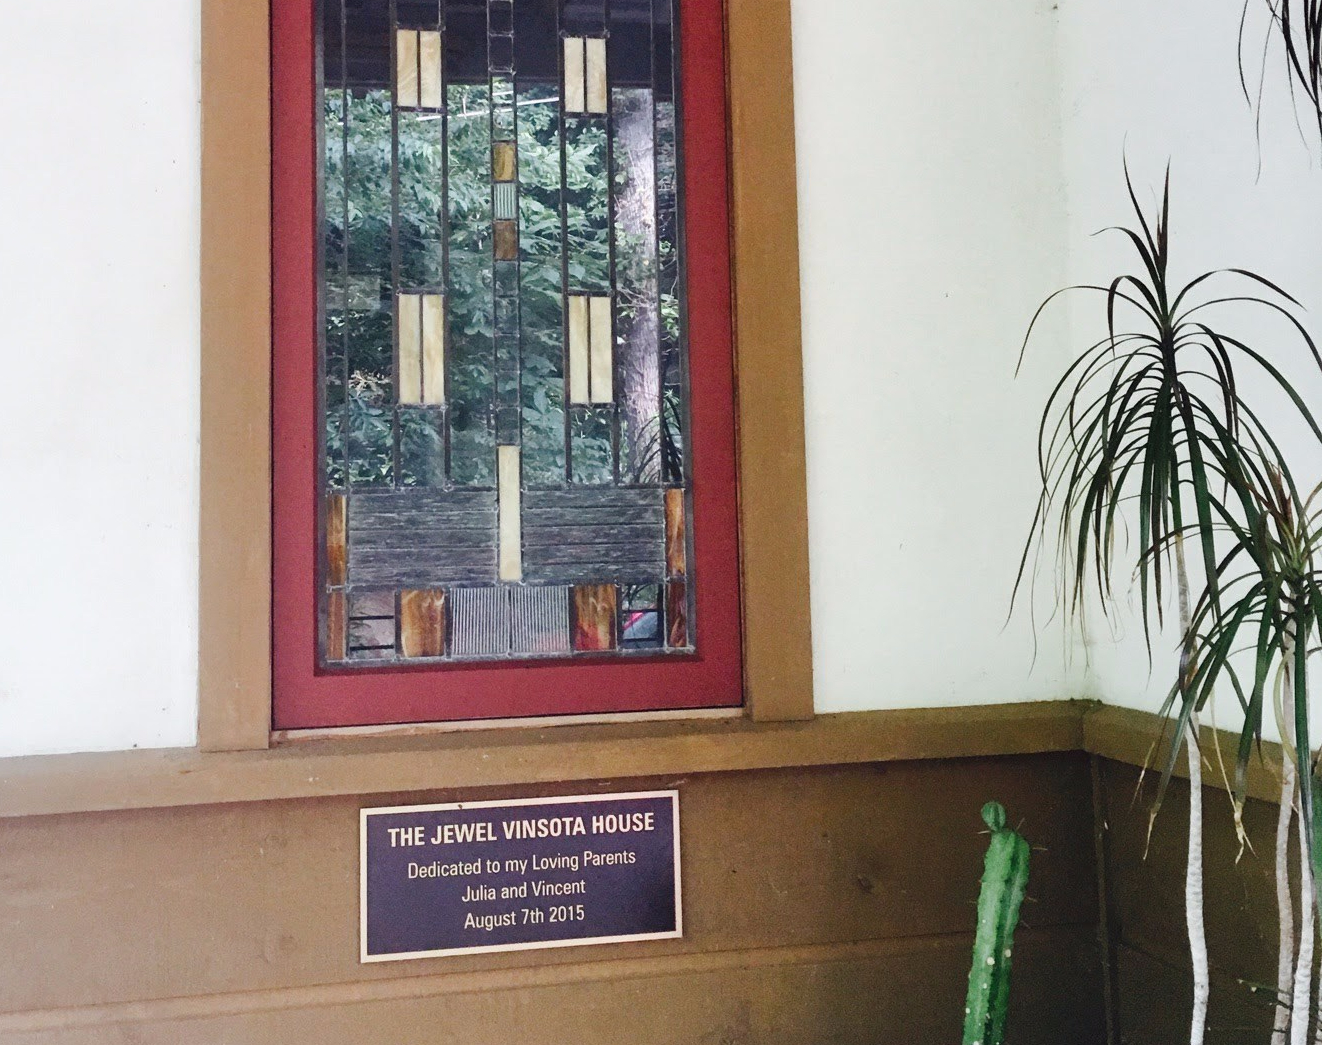 Leaded glass window with a plaque that reads "The Jewel Vinsota House: Dedicated to my Loving Parents Julia and Vincent. August 7 2015"